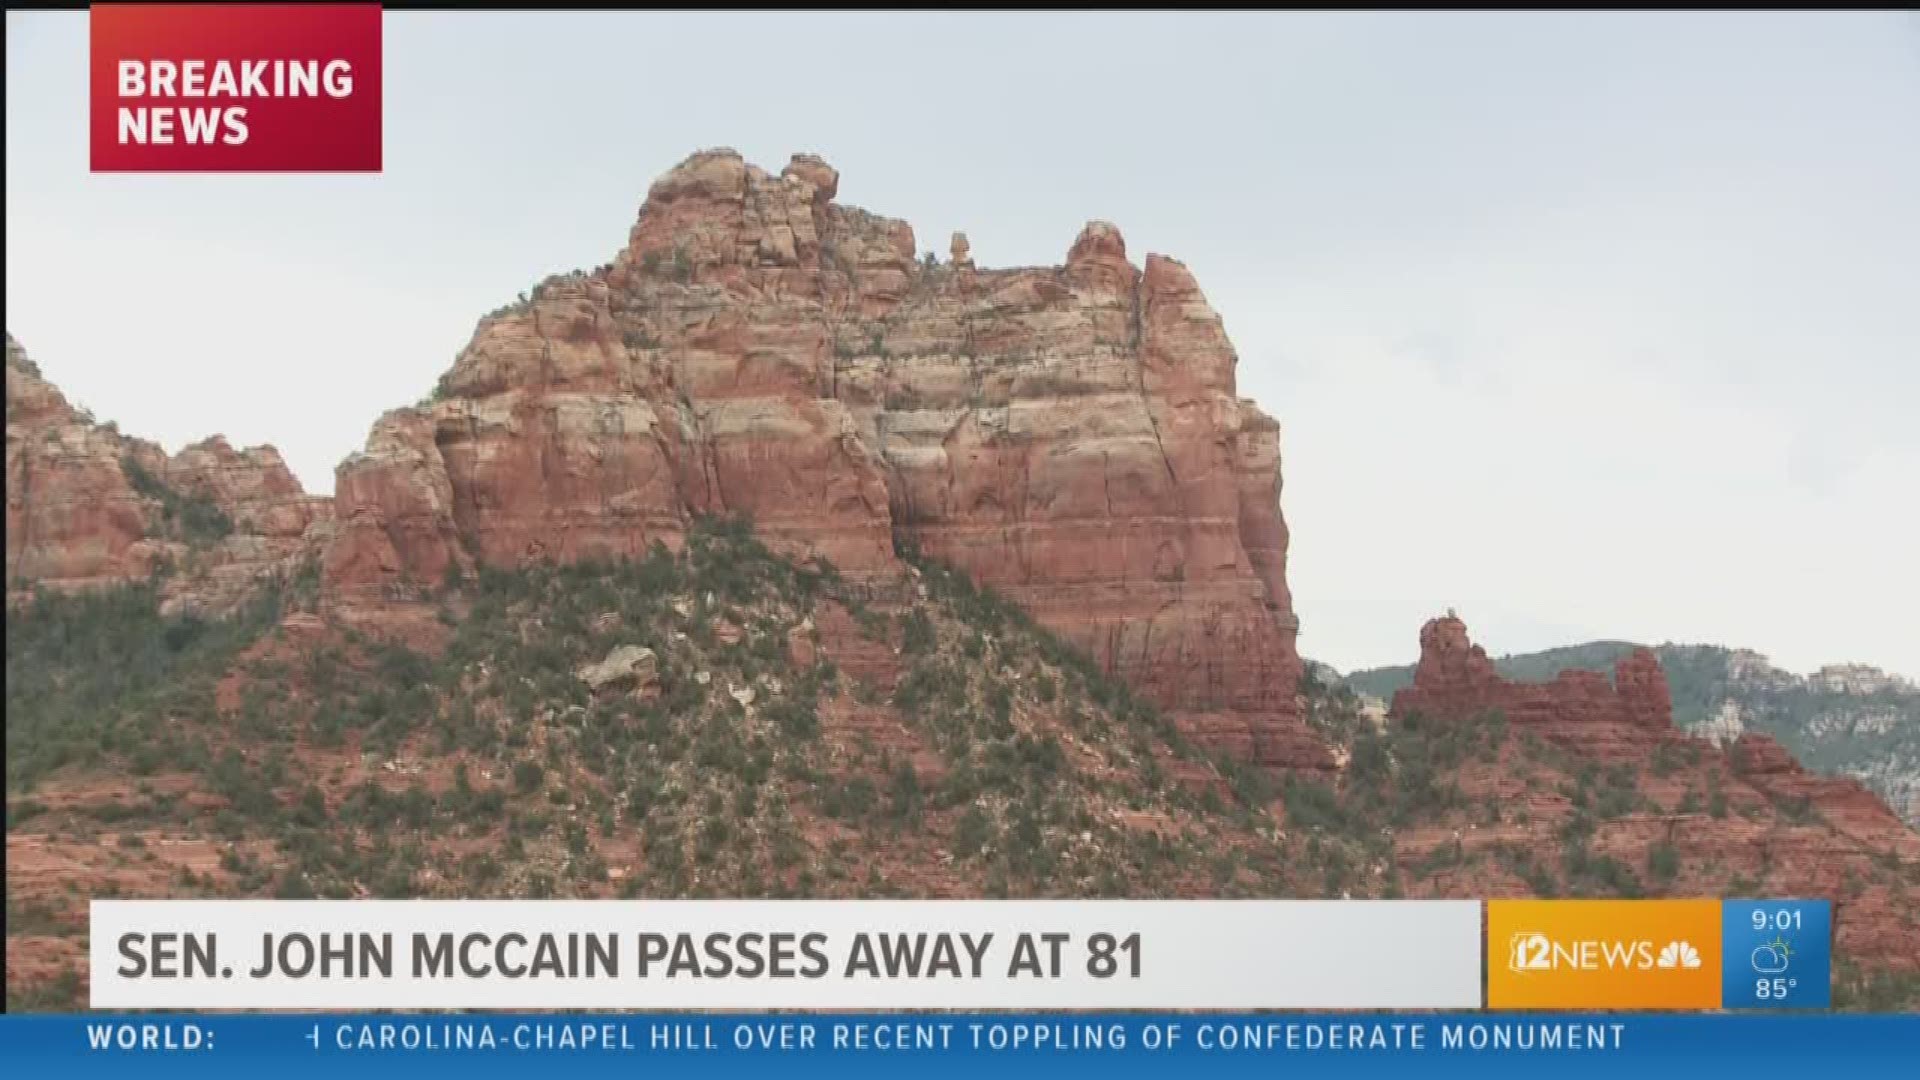 Sen. John McCain died Saturday and residents of Sedona, where he had his ranch, remember him.